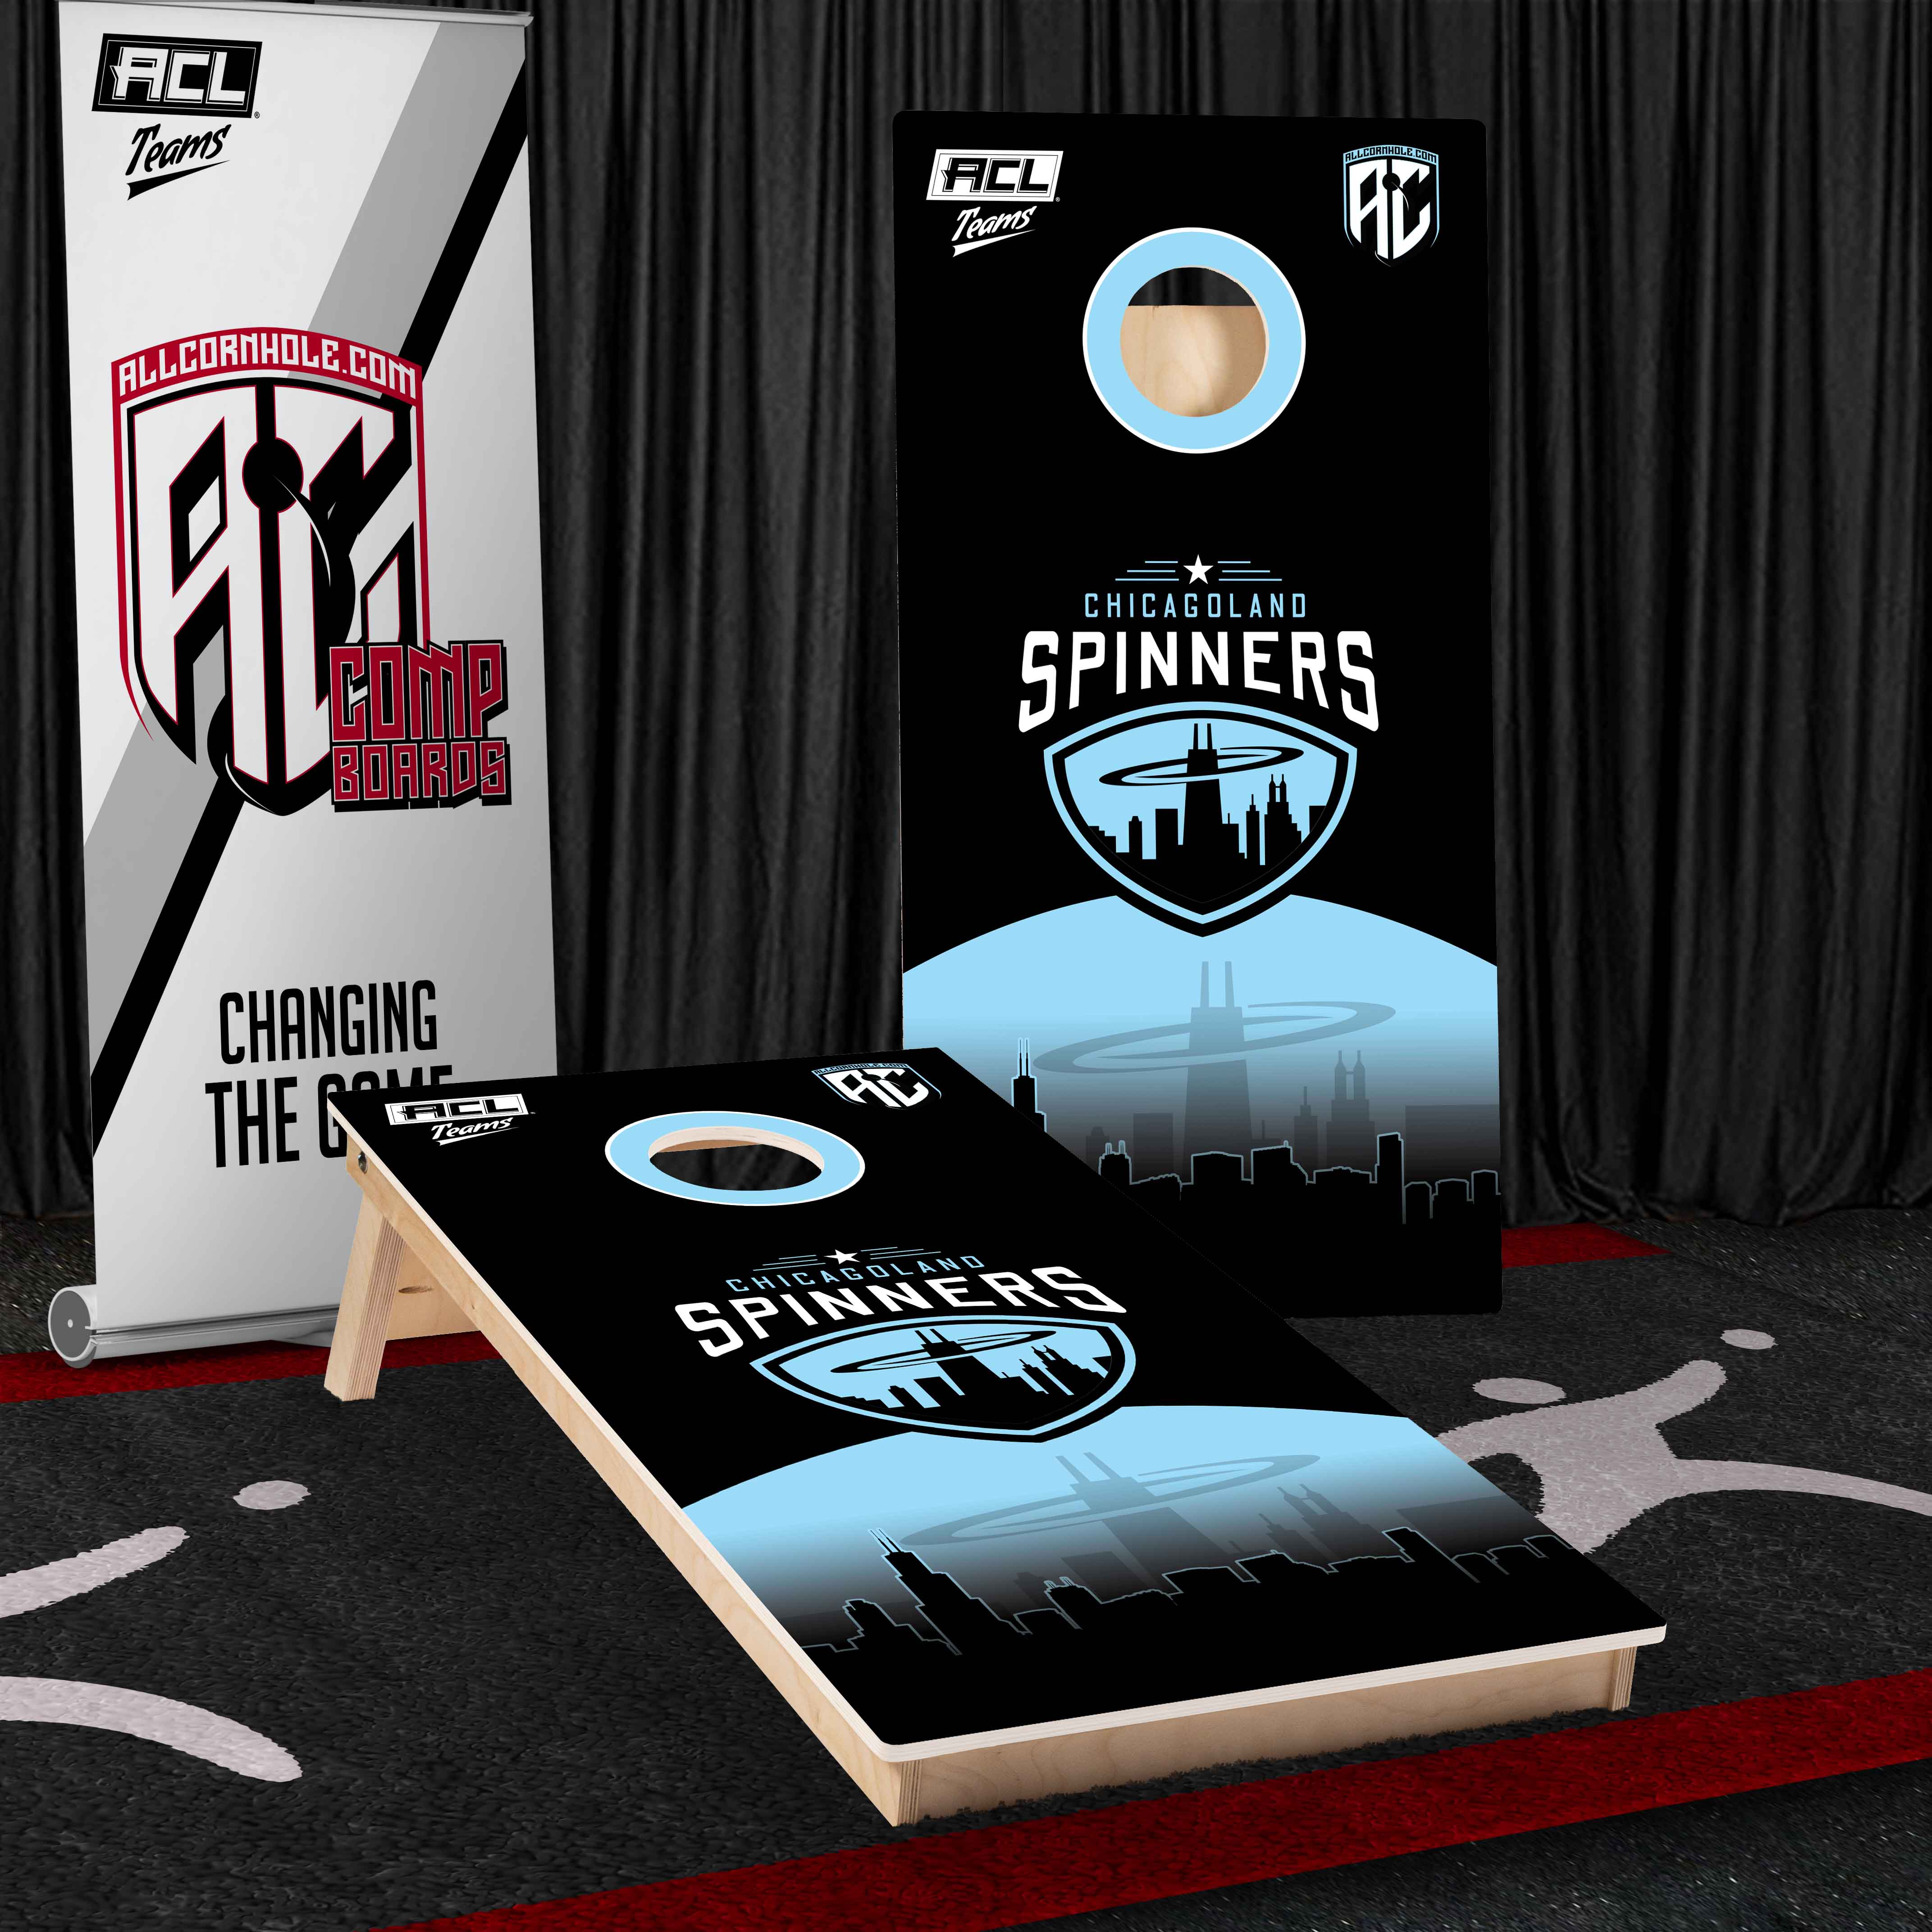 ACL Teams Competitive Cornhole Board - Chicagoland Spinners